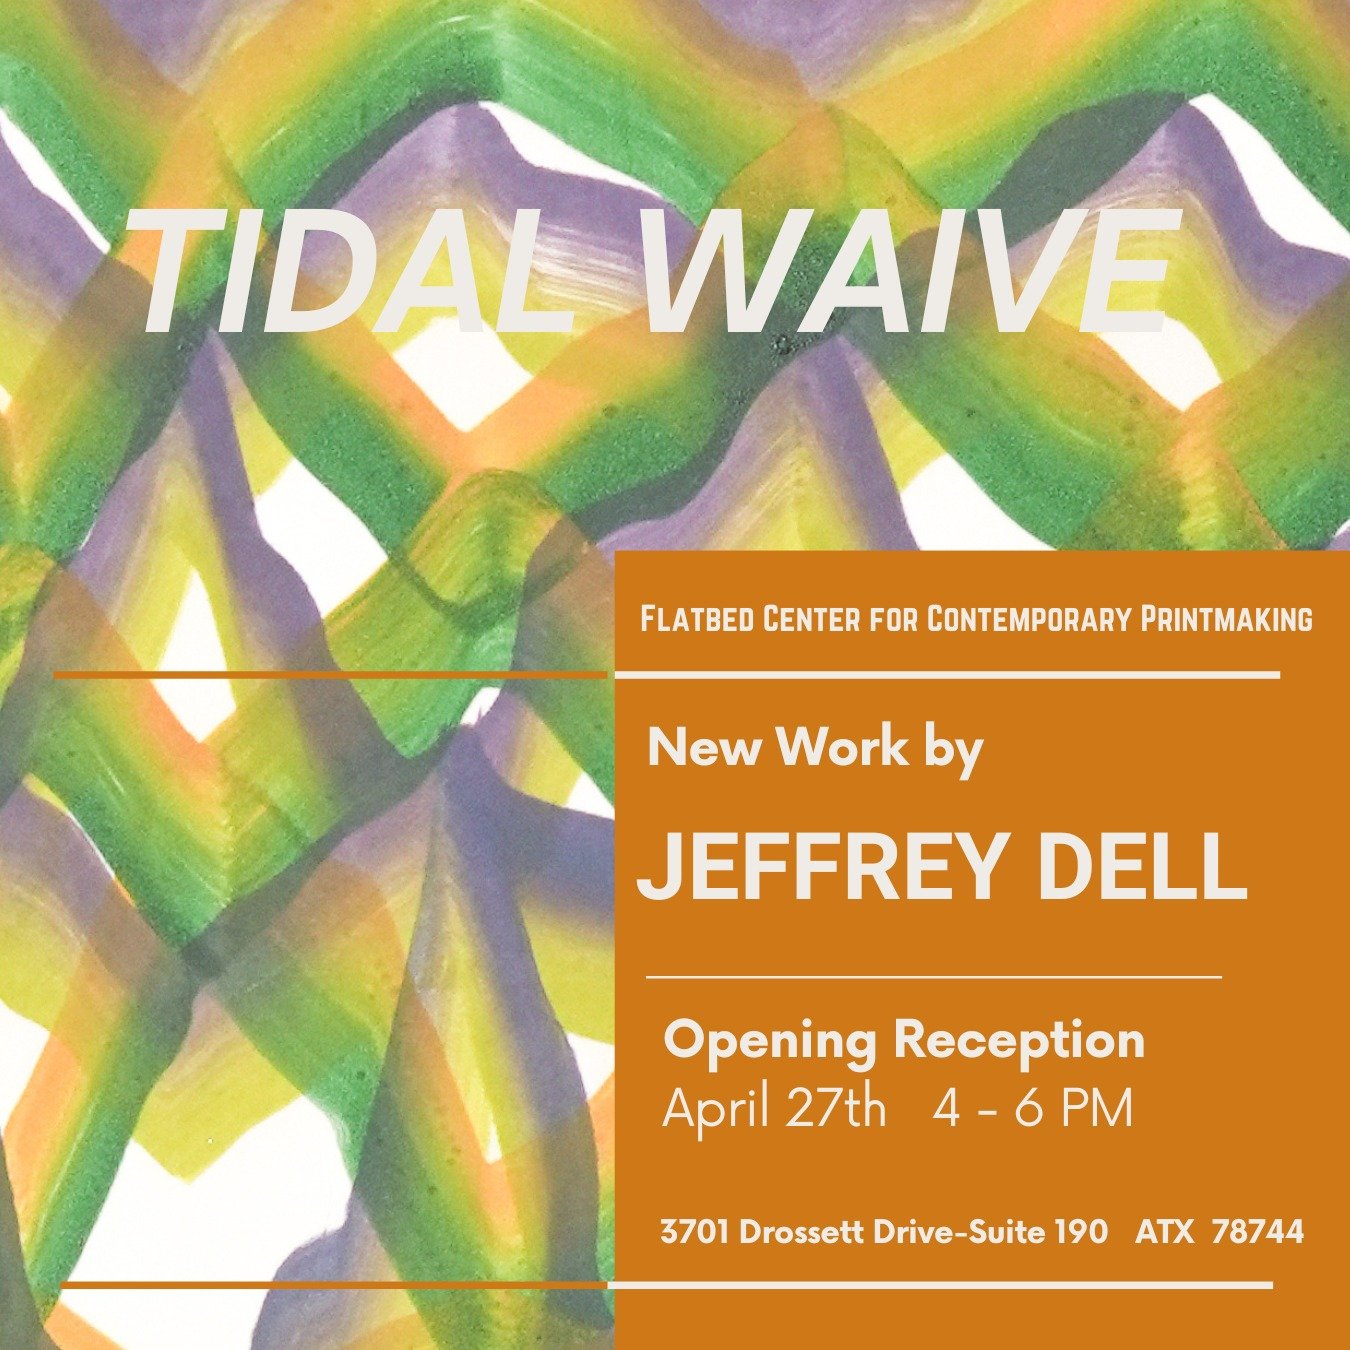 Flatbed invites everyone to our opening reception for Jeffrey Dell's solo exhibition, &quot;Tidal Waive' this Saturday, April 27th, from 4 until 6 pm.  Jeffrey will give a short commentary on the new monotypes and etching at 4:30.  #widelycolorful #m